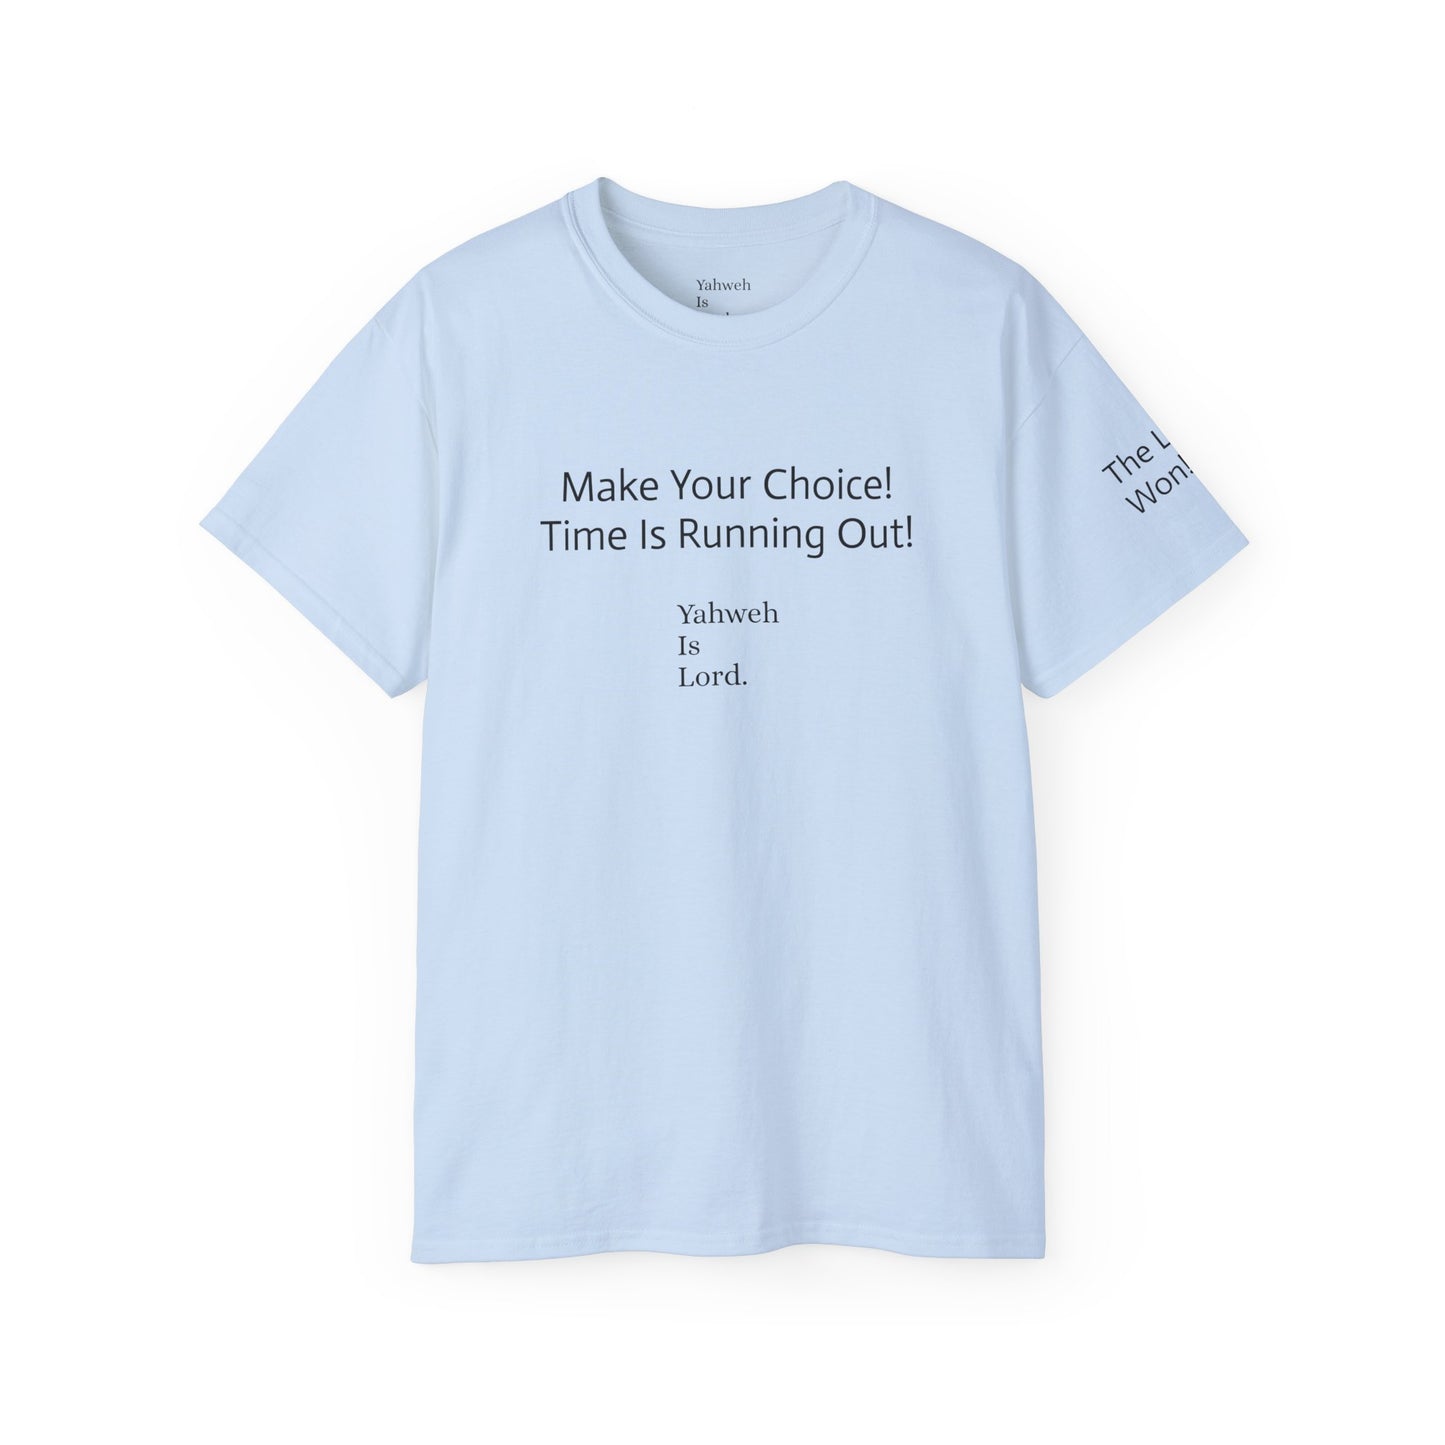 "Make Your Choice" Unisex Ultra Cotton Tee